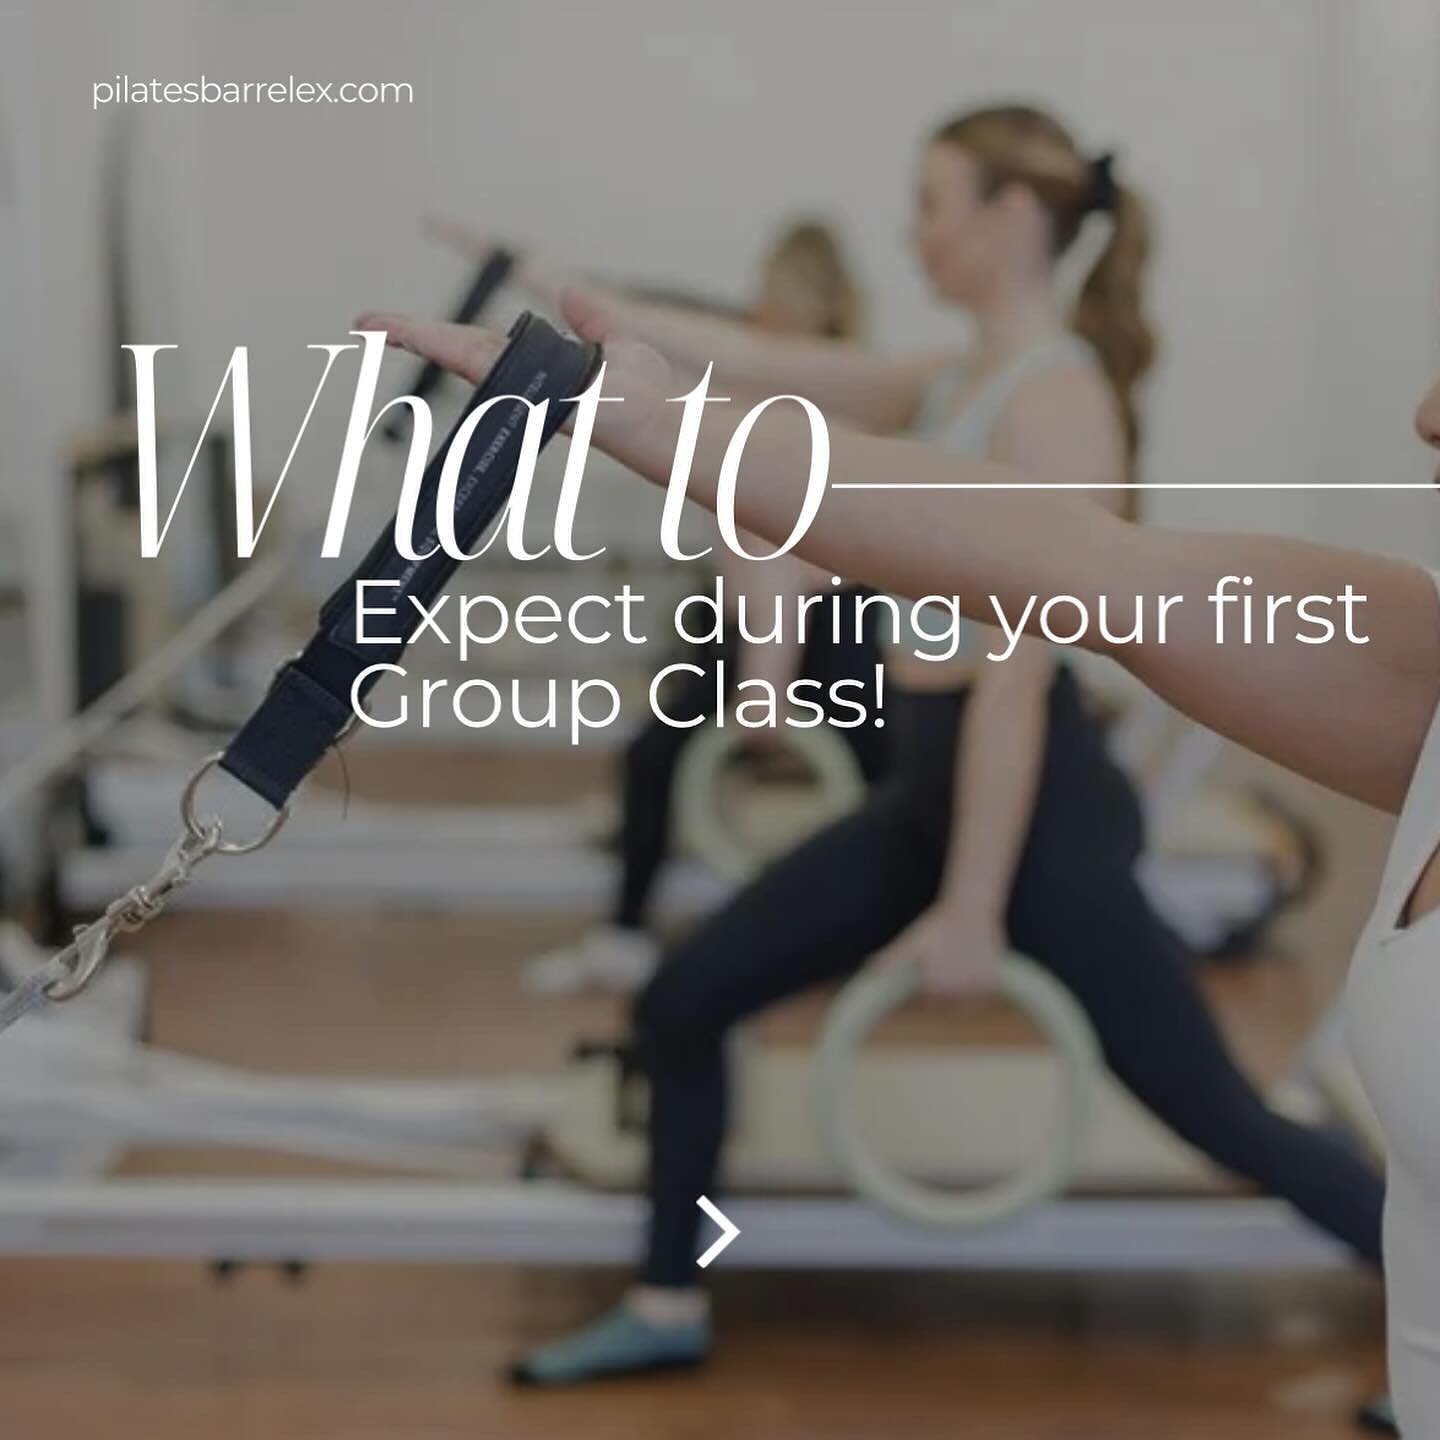 ✨What to expect during your first Group Class✨

&bull;
&bull;
&bull;
#pilateslifestyle #pilateslex #pilateslexingtonky #pilatesbarrelex #pilatesinstructor #pilatesreformer #pilatesstudio #pilatesstudiolex #pilatesstudiolexington #pilatesinlexington #